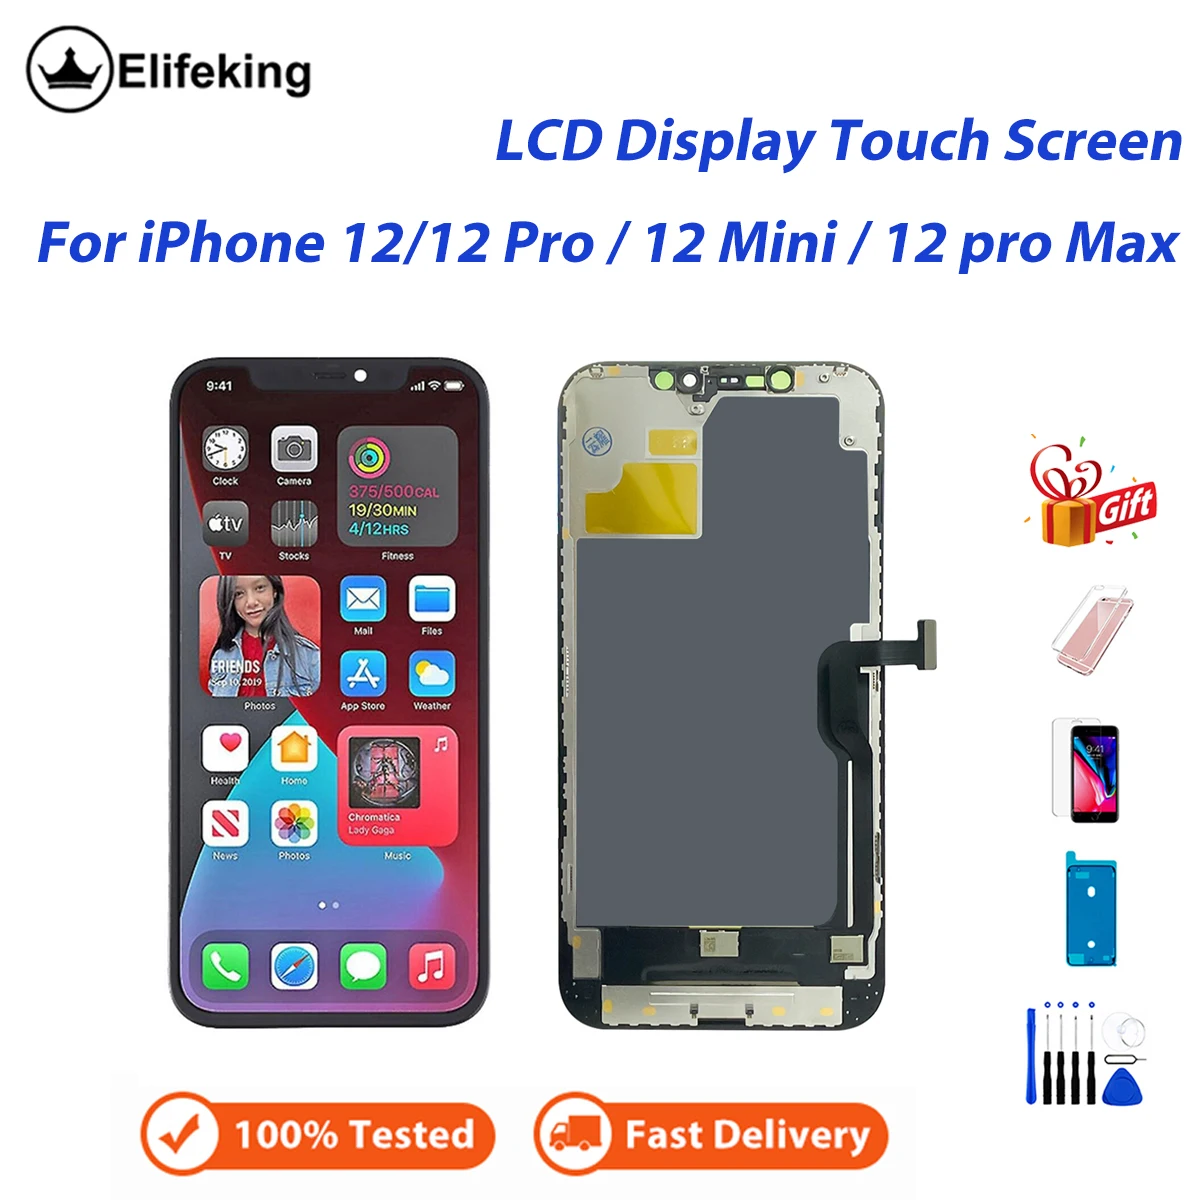 

INCELL LCD For iPhone 12 Mini/12/12 Pro/12 Pro Max 100% Tested LCD Display Screen Digitizer Assembly Replace Parts with Freebies